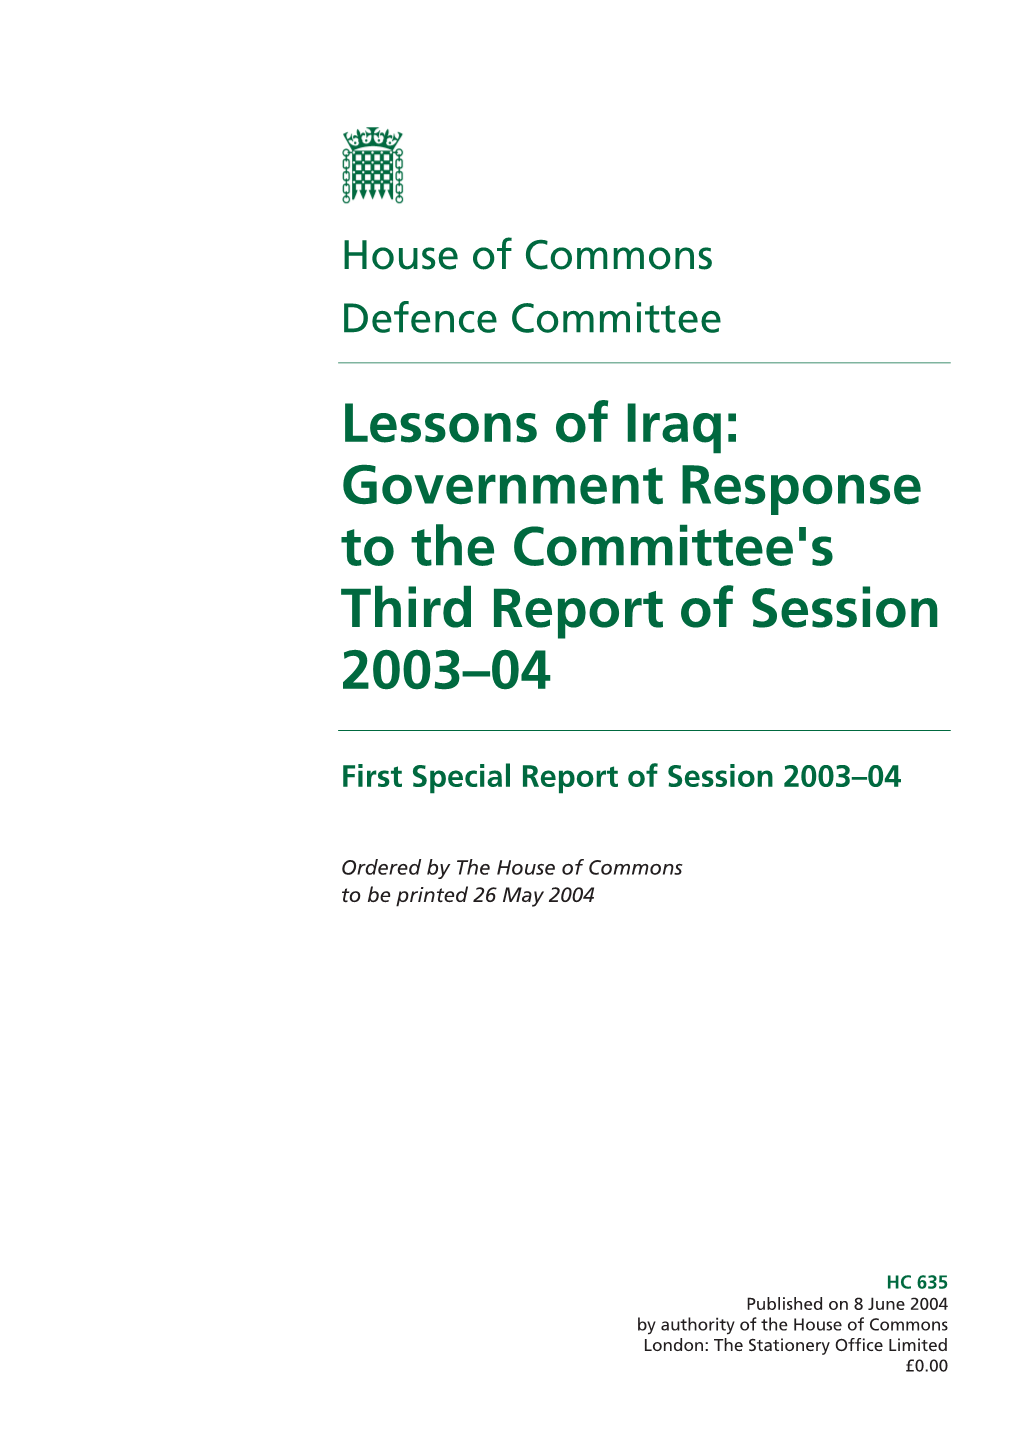 Lessons of Iraq: Government Response to the Committee's Third Report of Session 2003–04